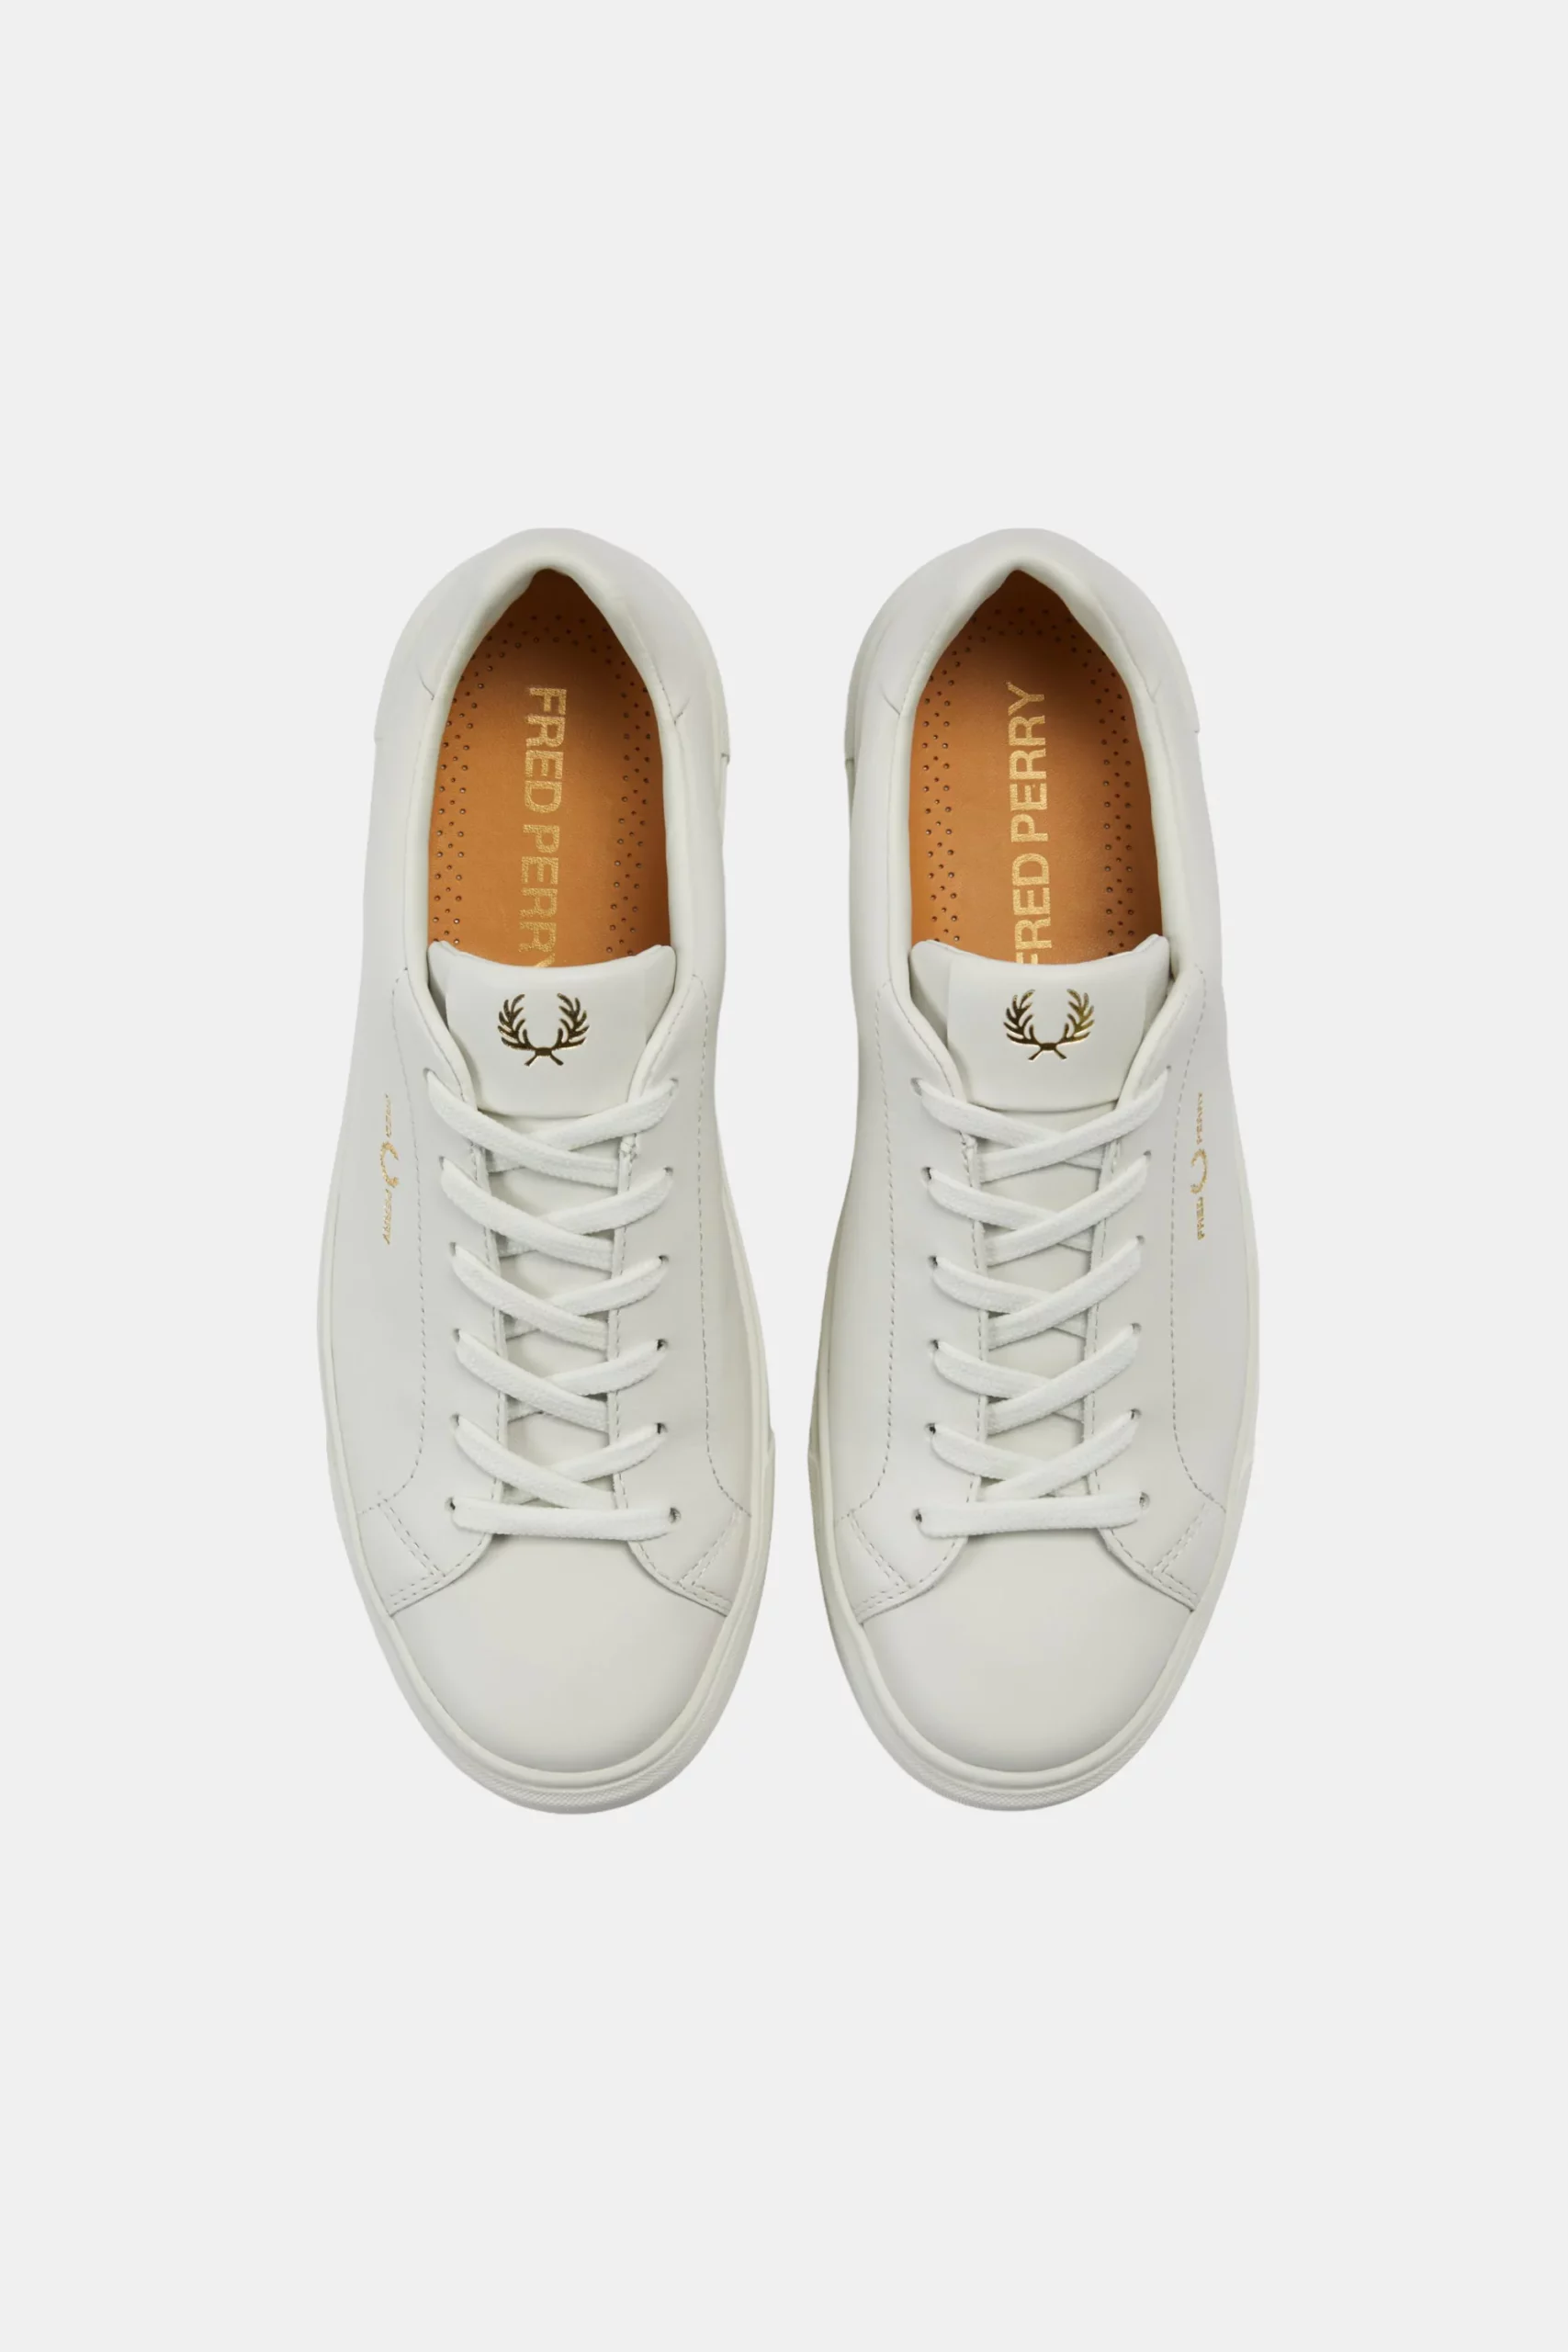 krossovki fred perry b71 porcelain 2